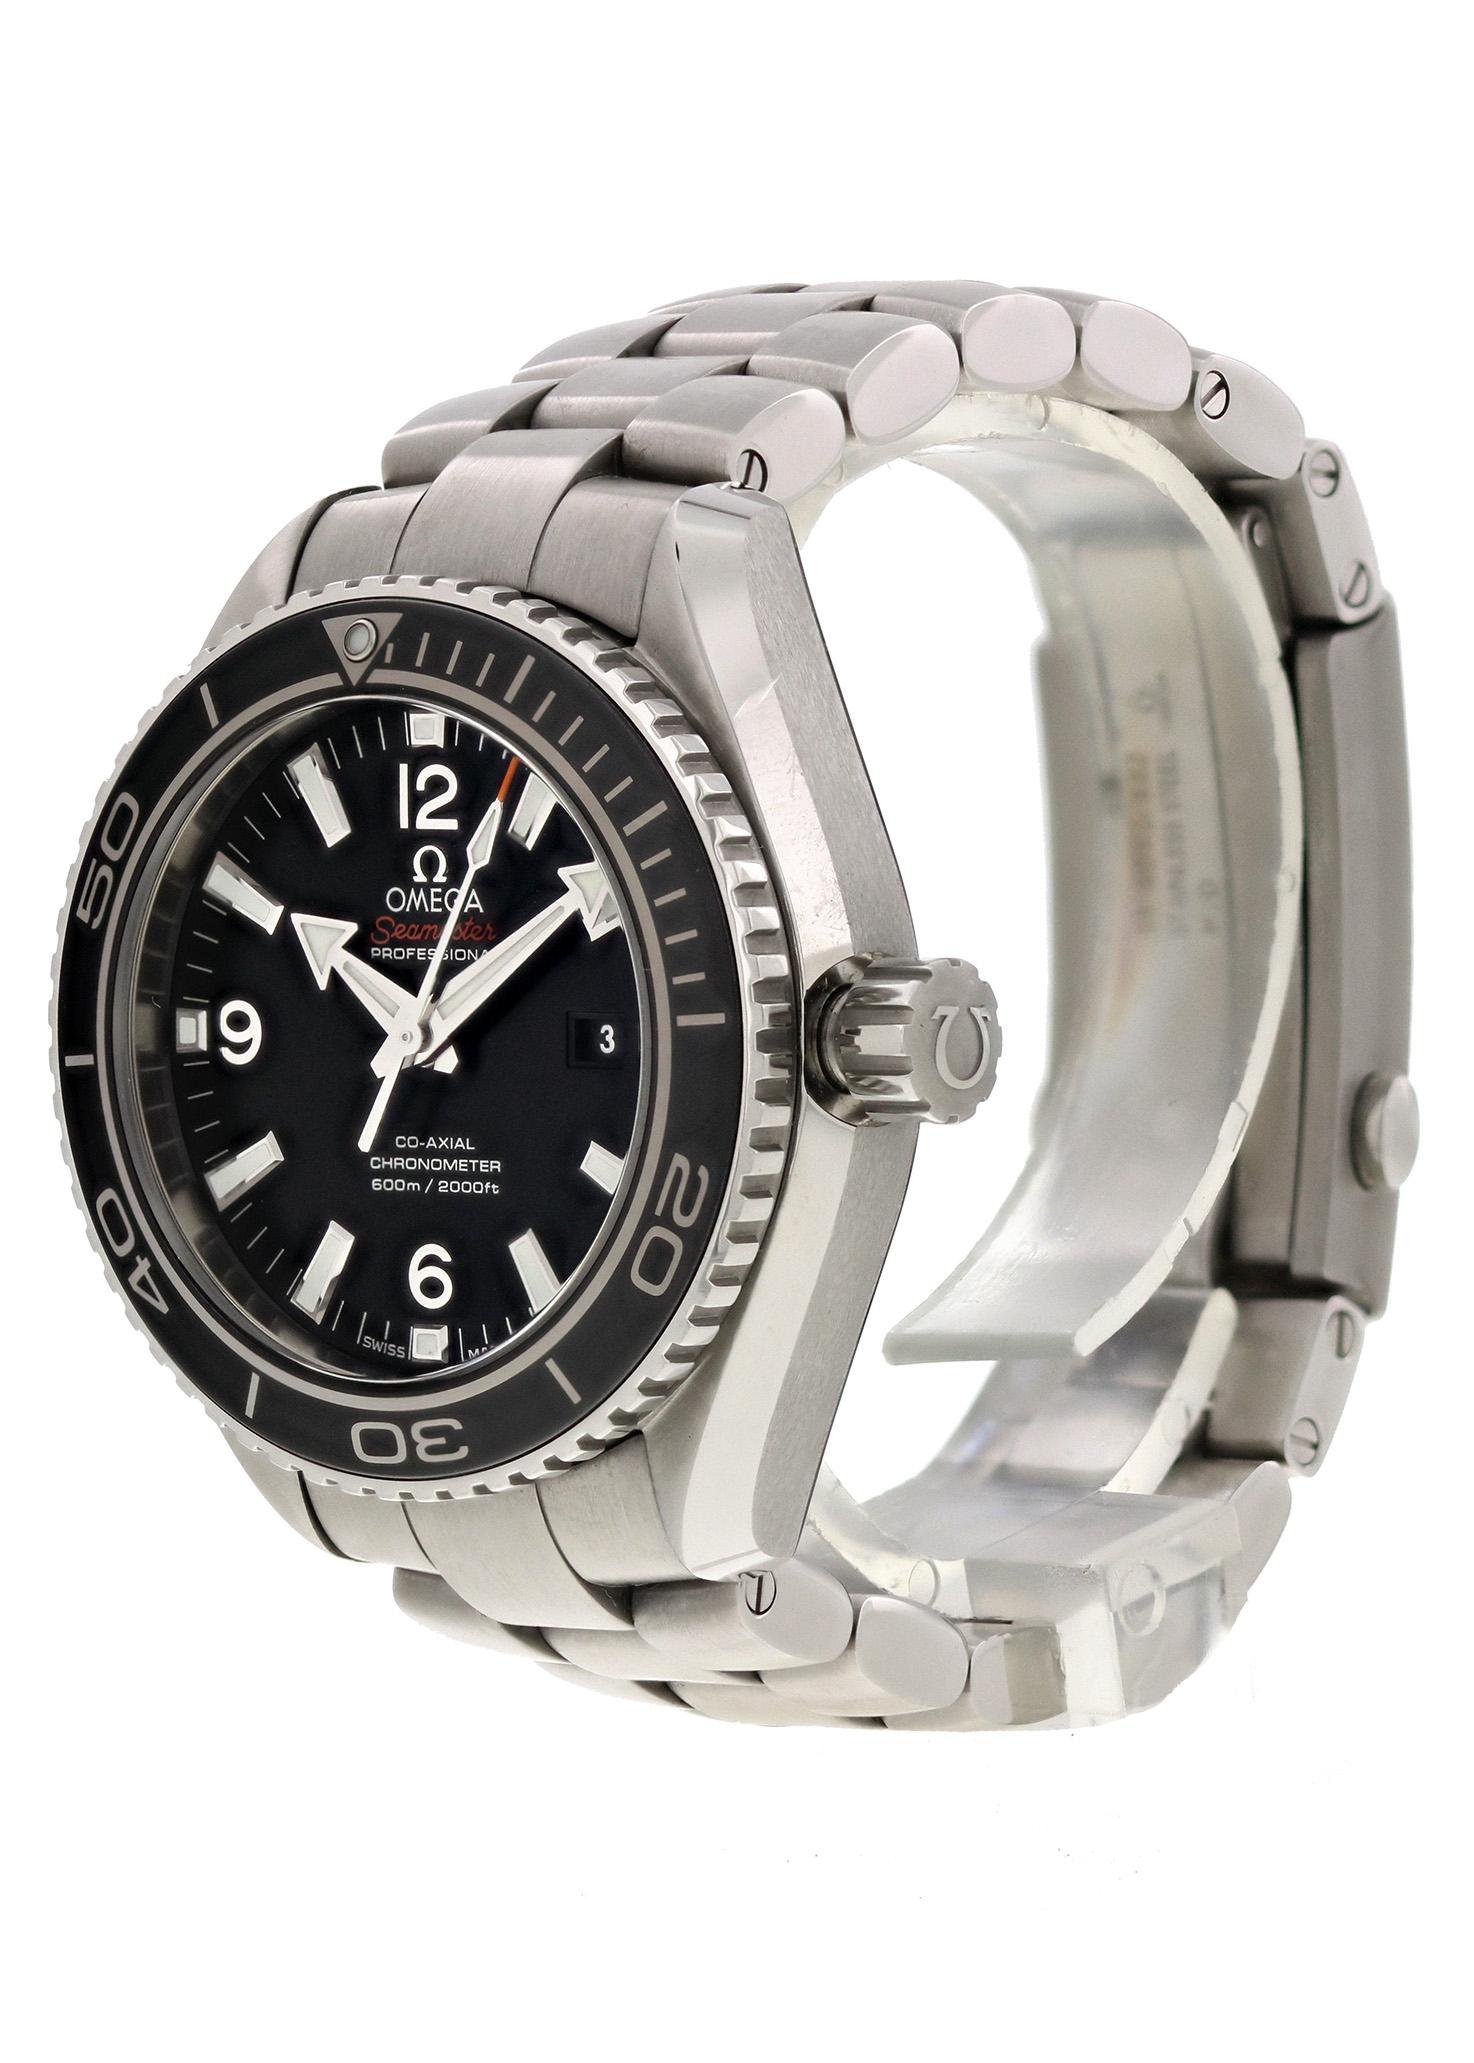 Omega Seamaster Planet Ocean 232.30.38.20.01.001 Men Watch. 
37.5mm Stainless Steel case. 
Stainless Steel Unidirectional bezel. 
Black dial with Luminous Steel hands and index hour markers. 
Minute markers on the outer dial. 
Date display at the 3